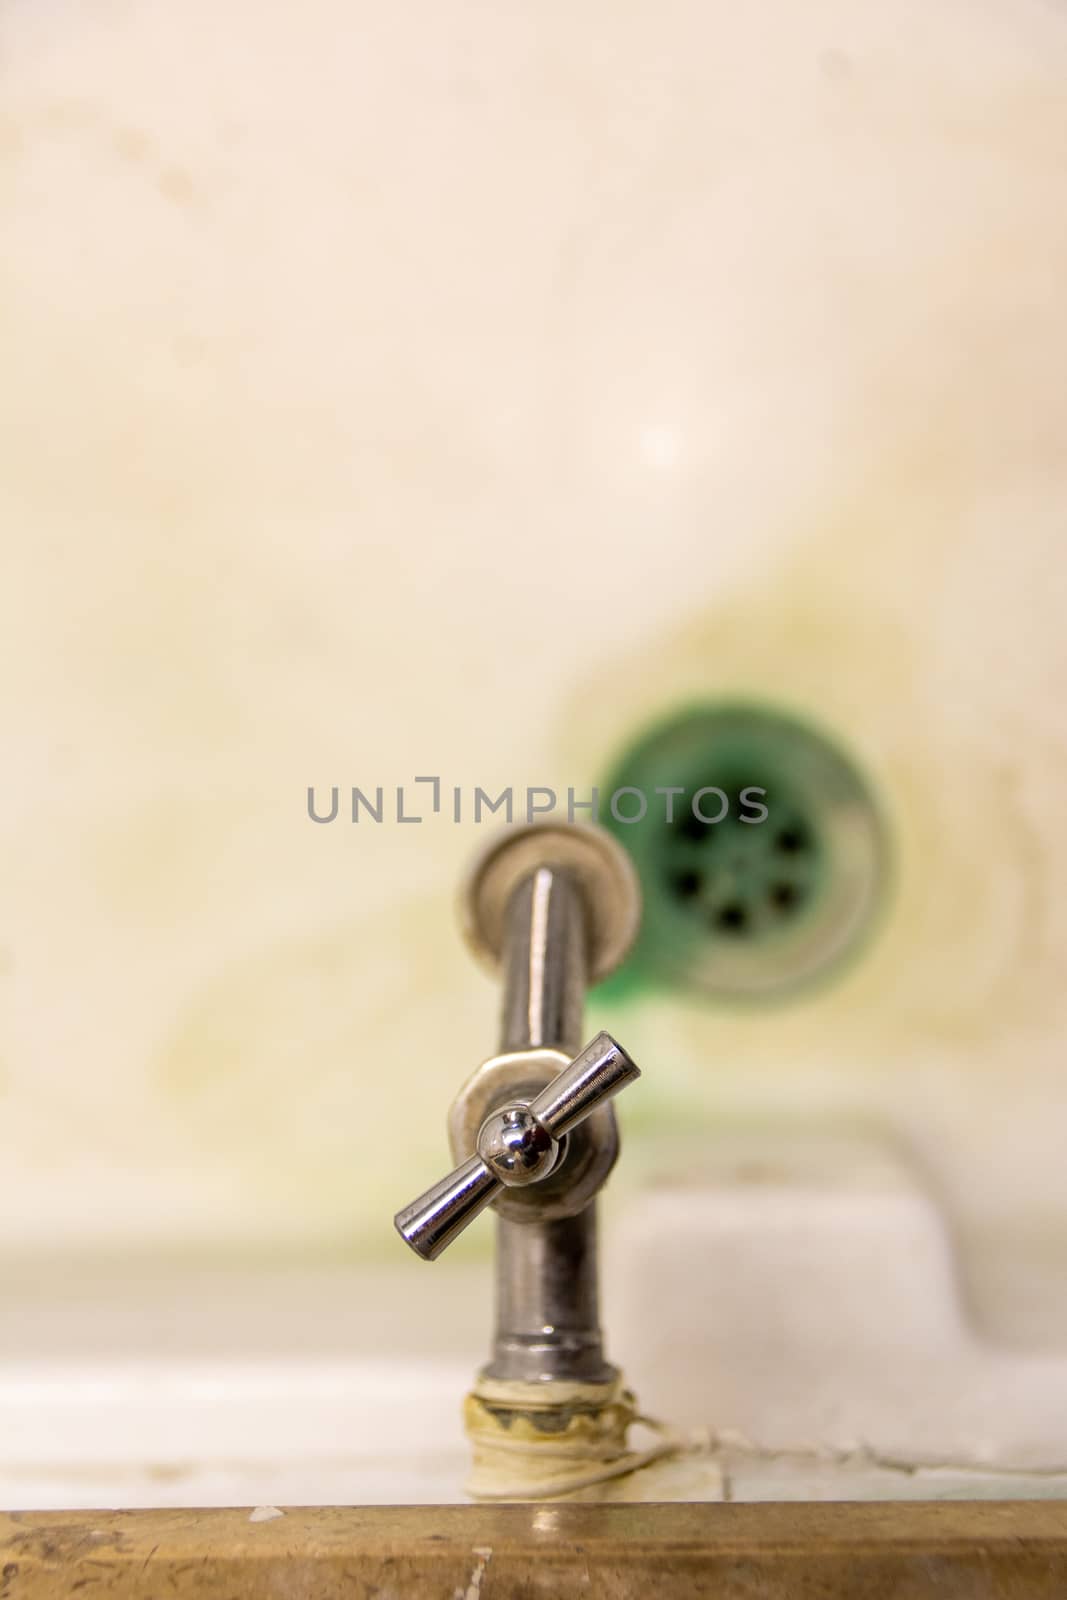 old and dirty empty sink stone with water tap drain and faucet. Selective focus, blurry background. by kb79